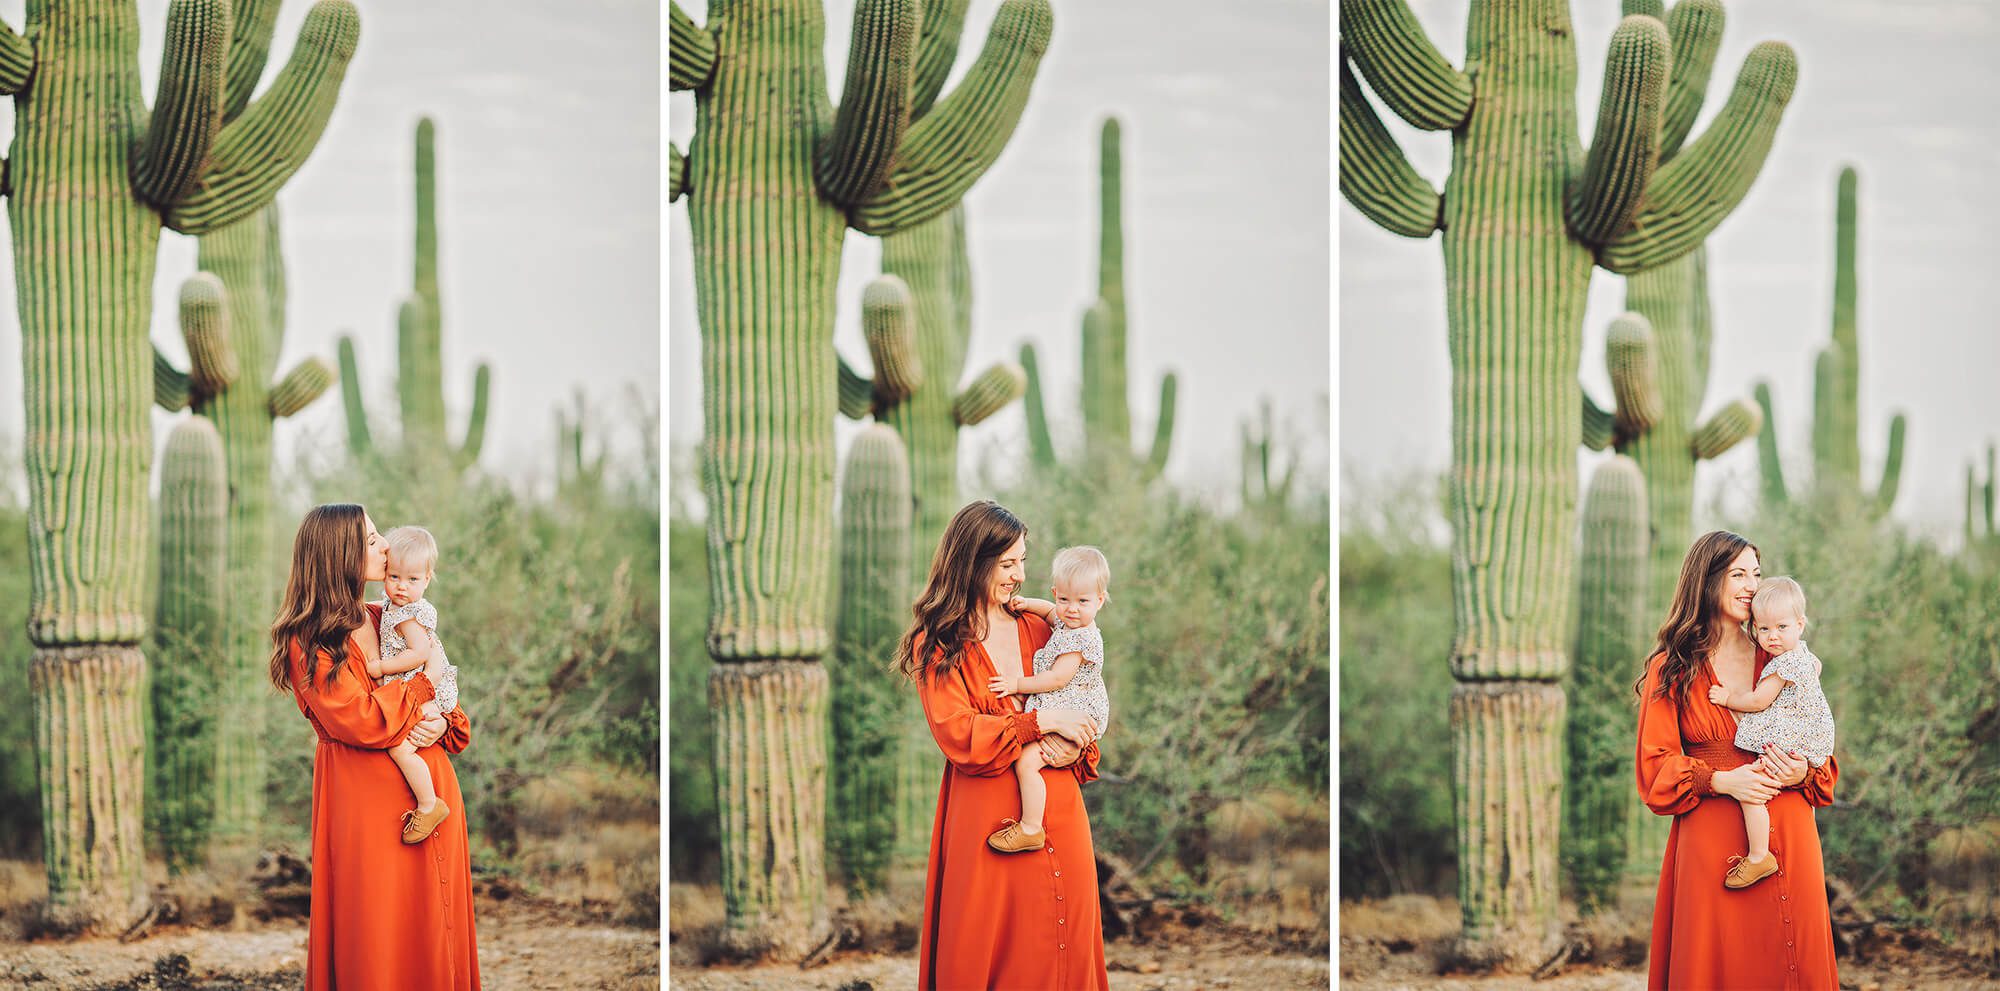 Mom and daughter during their breastfeeding session at Saguaro National Park